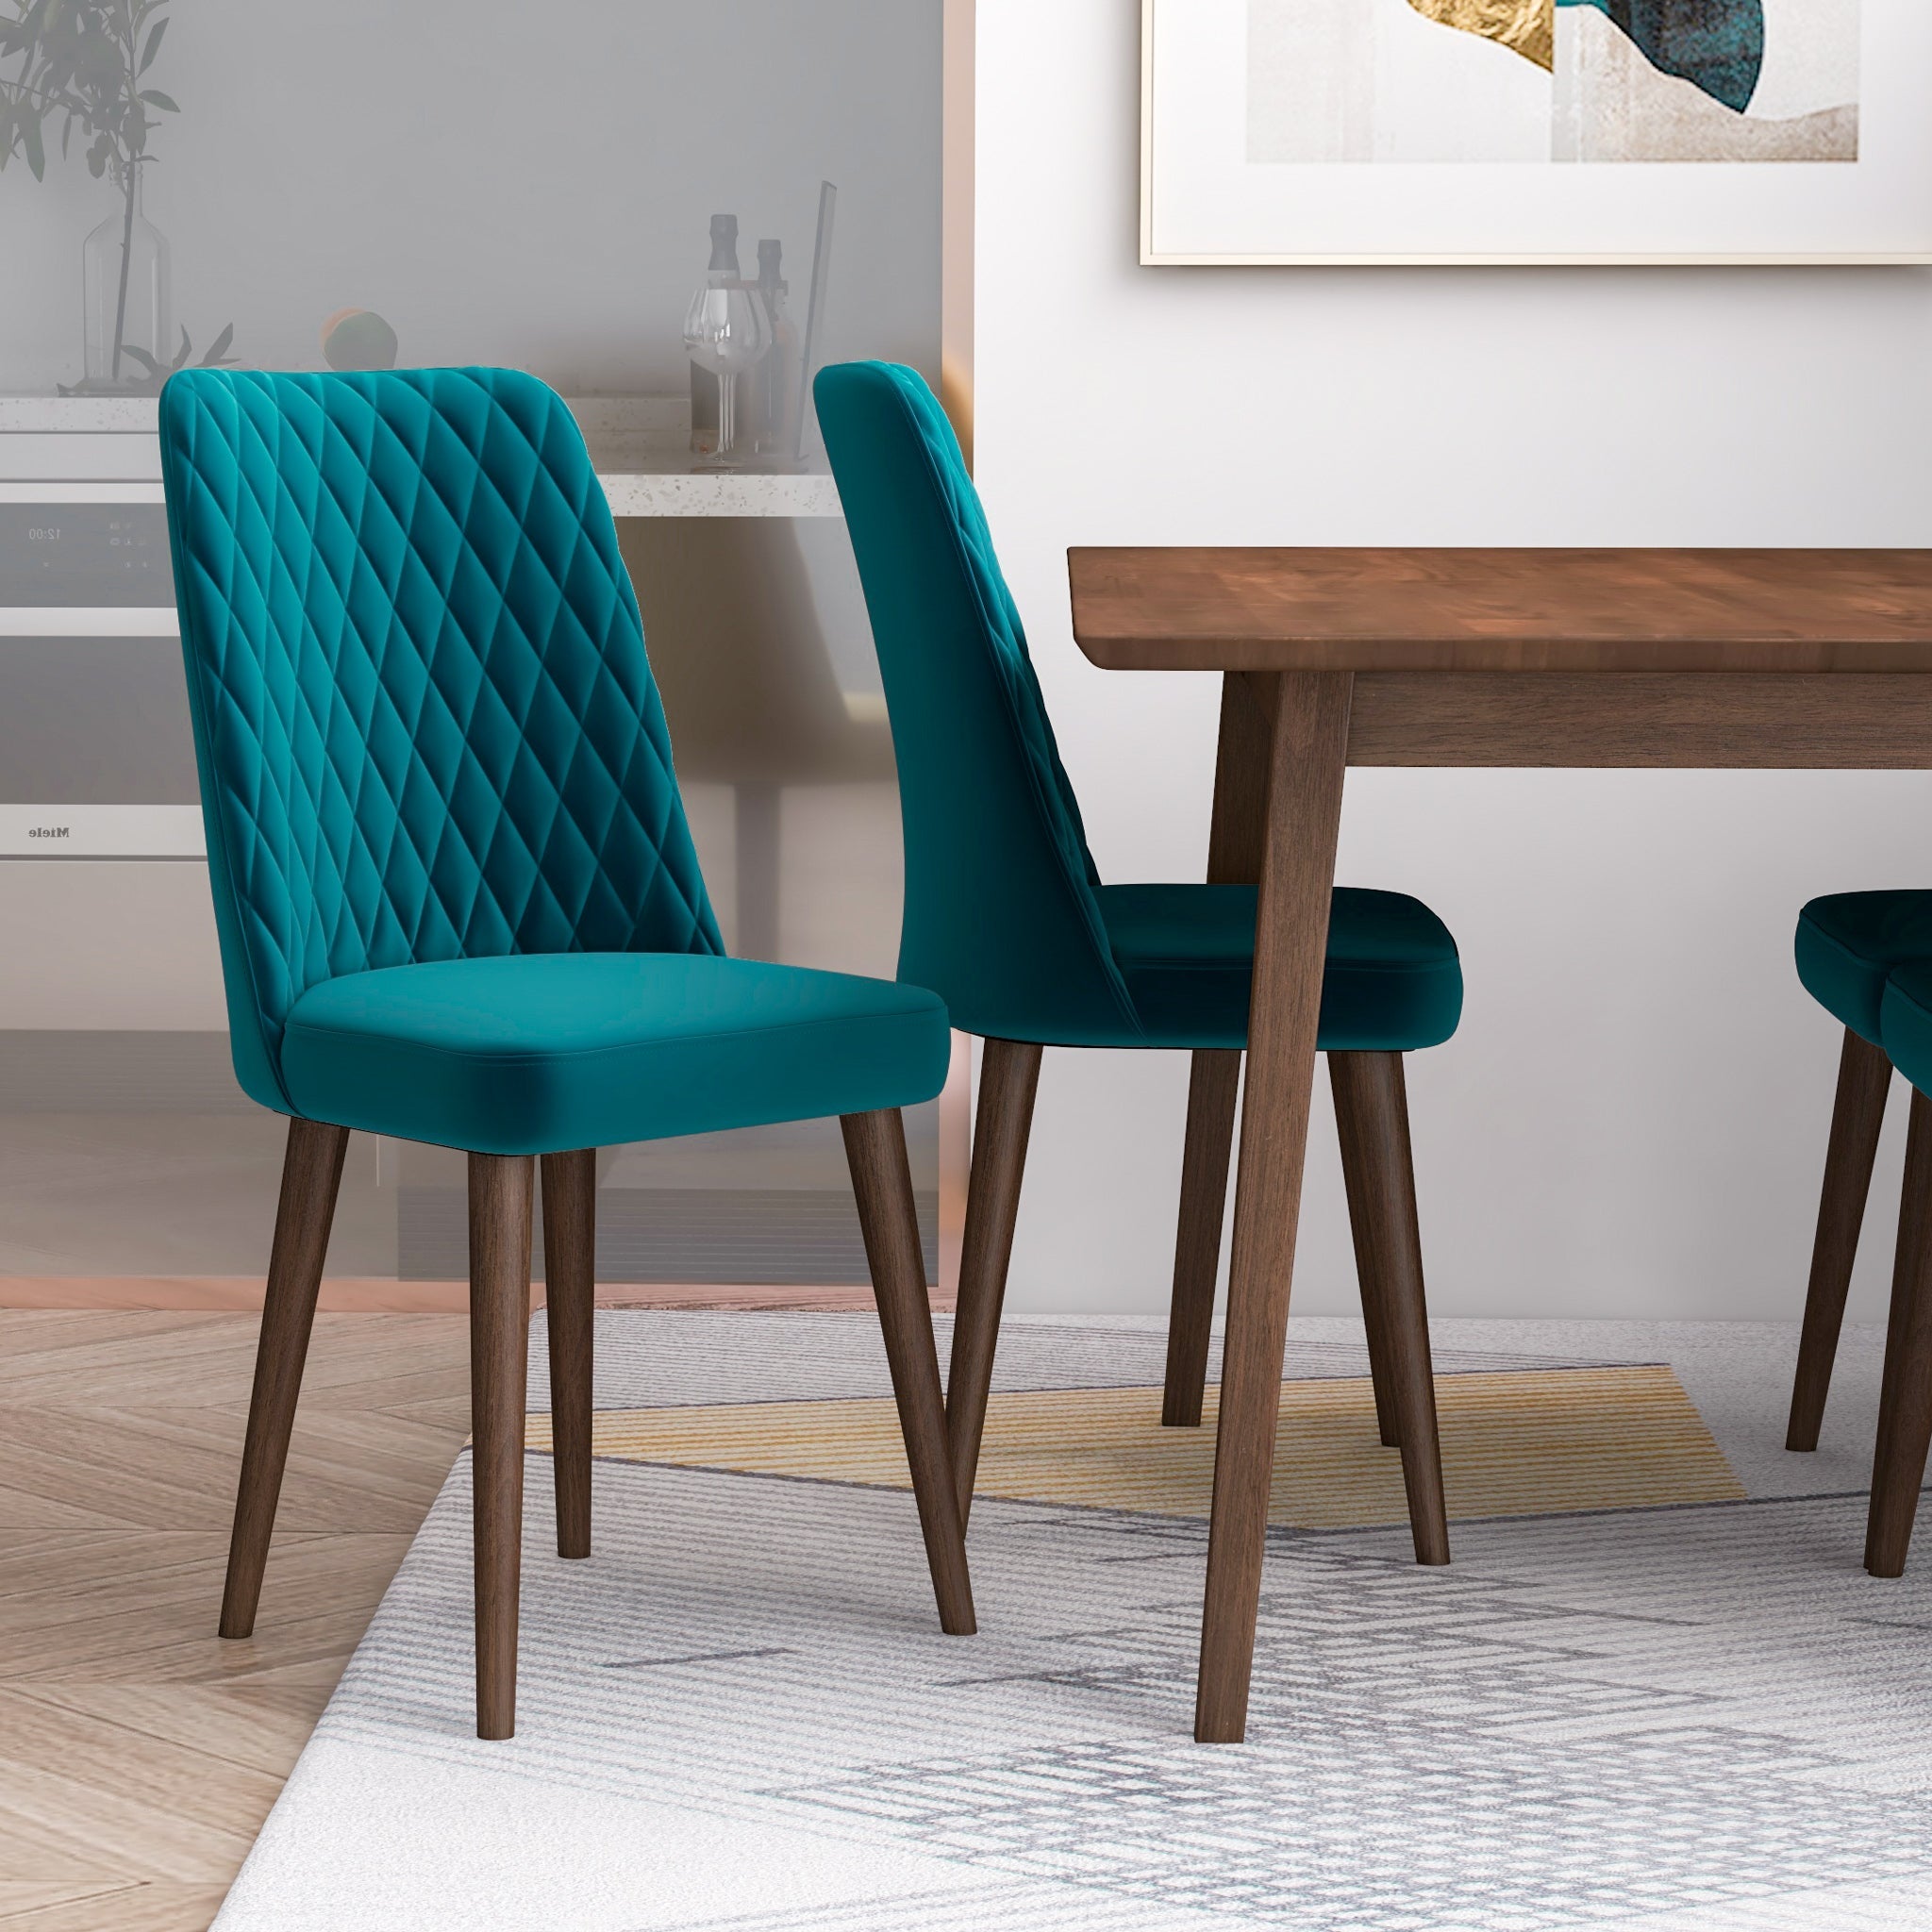 Alpine (Small - Walnut) Dining Set with 4 Evette (Teal Velvet) Dining Chairs